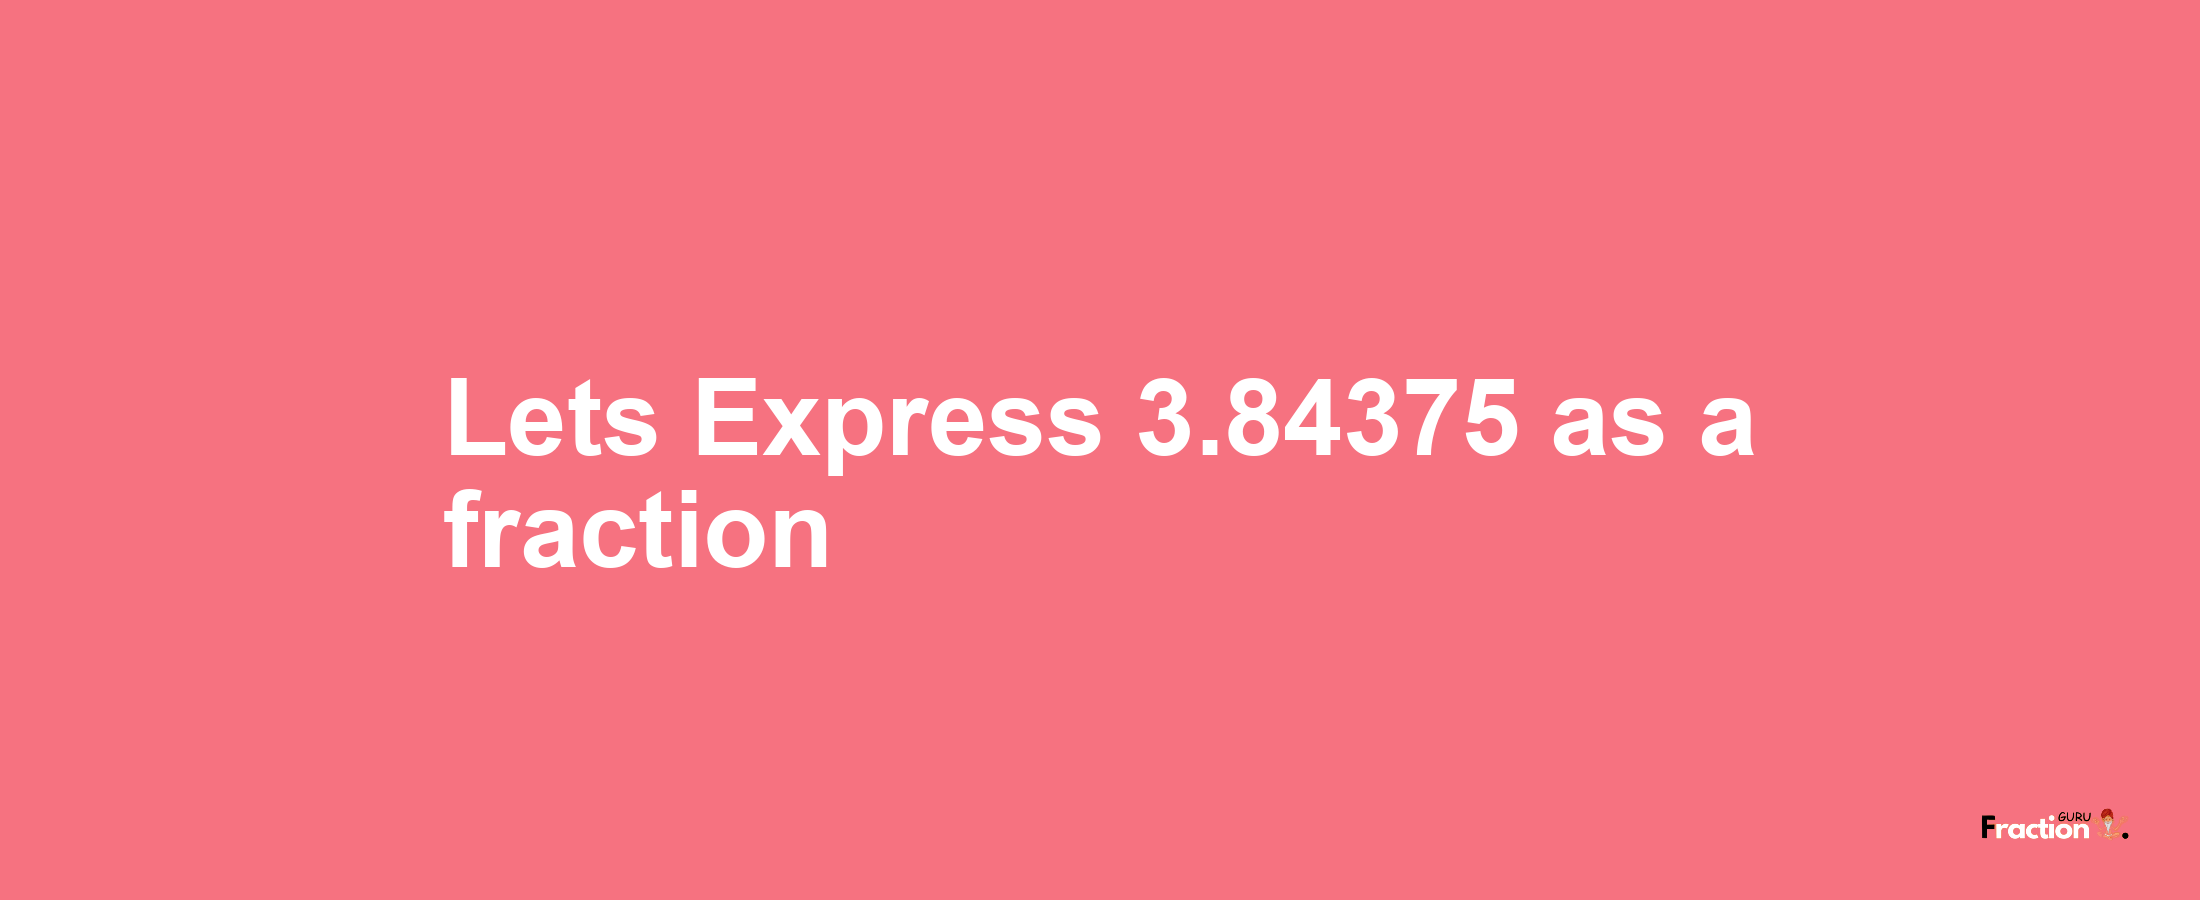 Lets Express 3.84375 as afraction